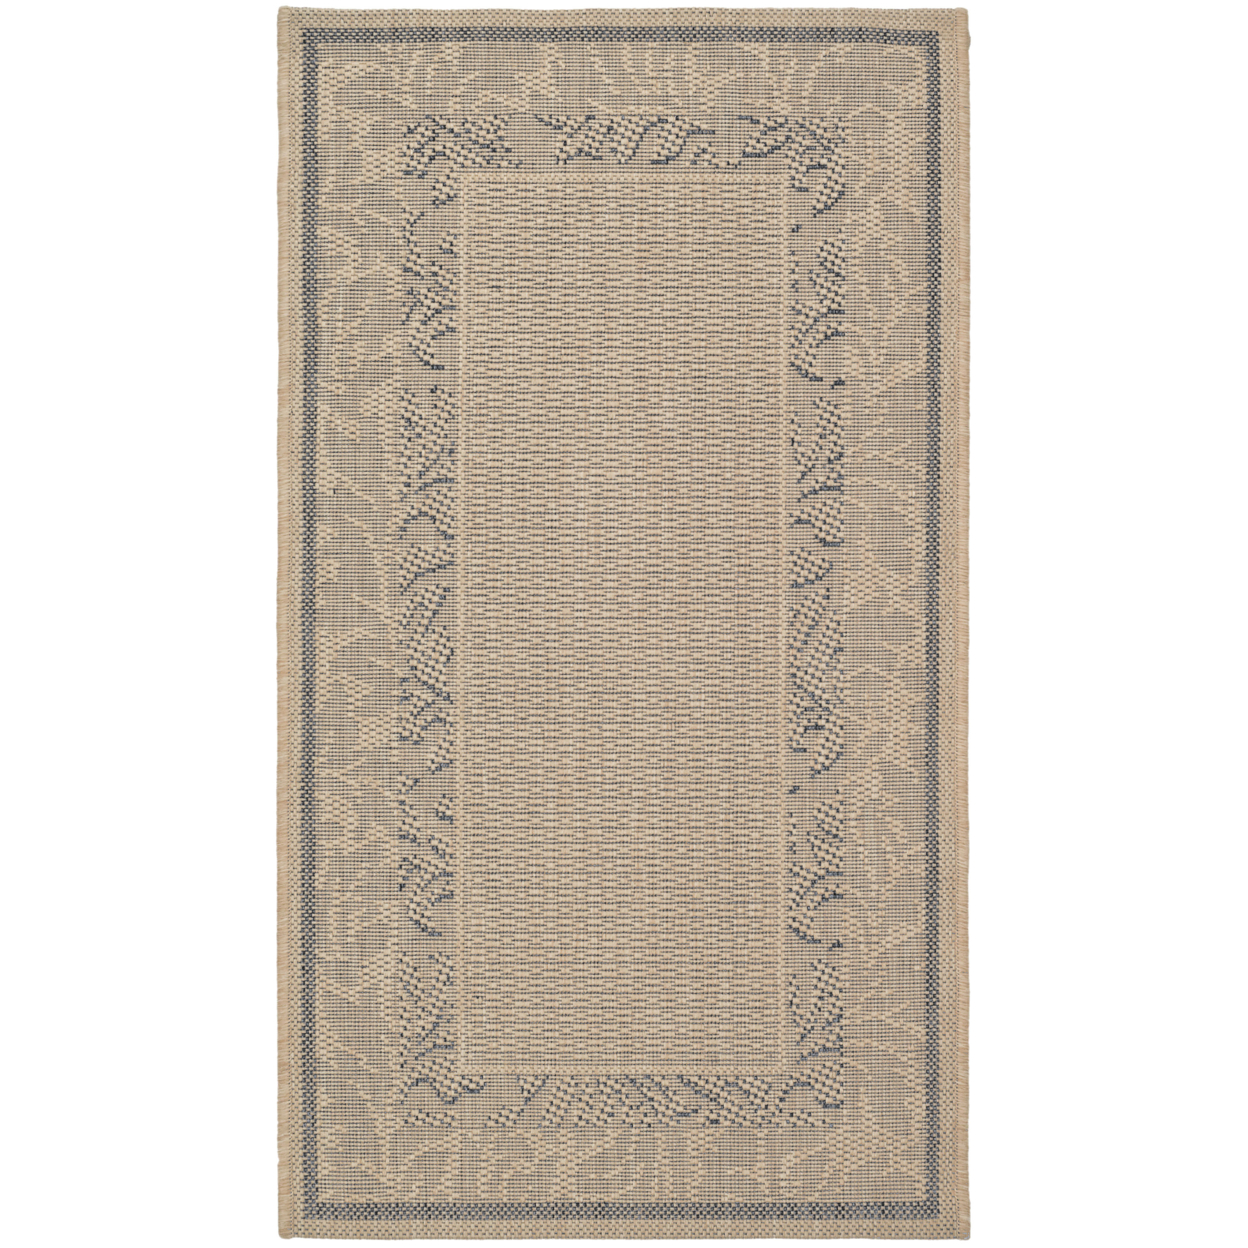 SAFAVIEH Outdoor CY1704-3001 Courtyard Natural / Brown Rug - 4' X 5' 7